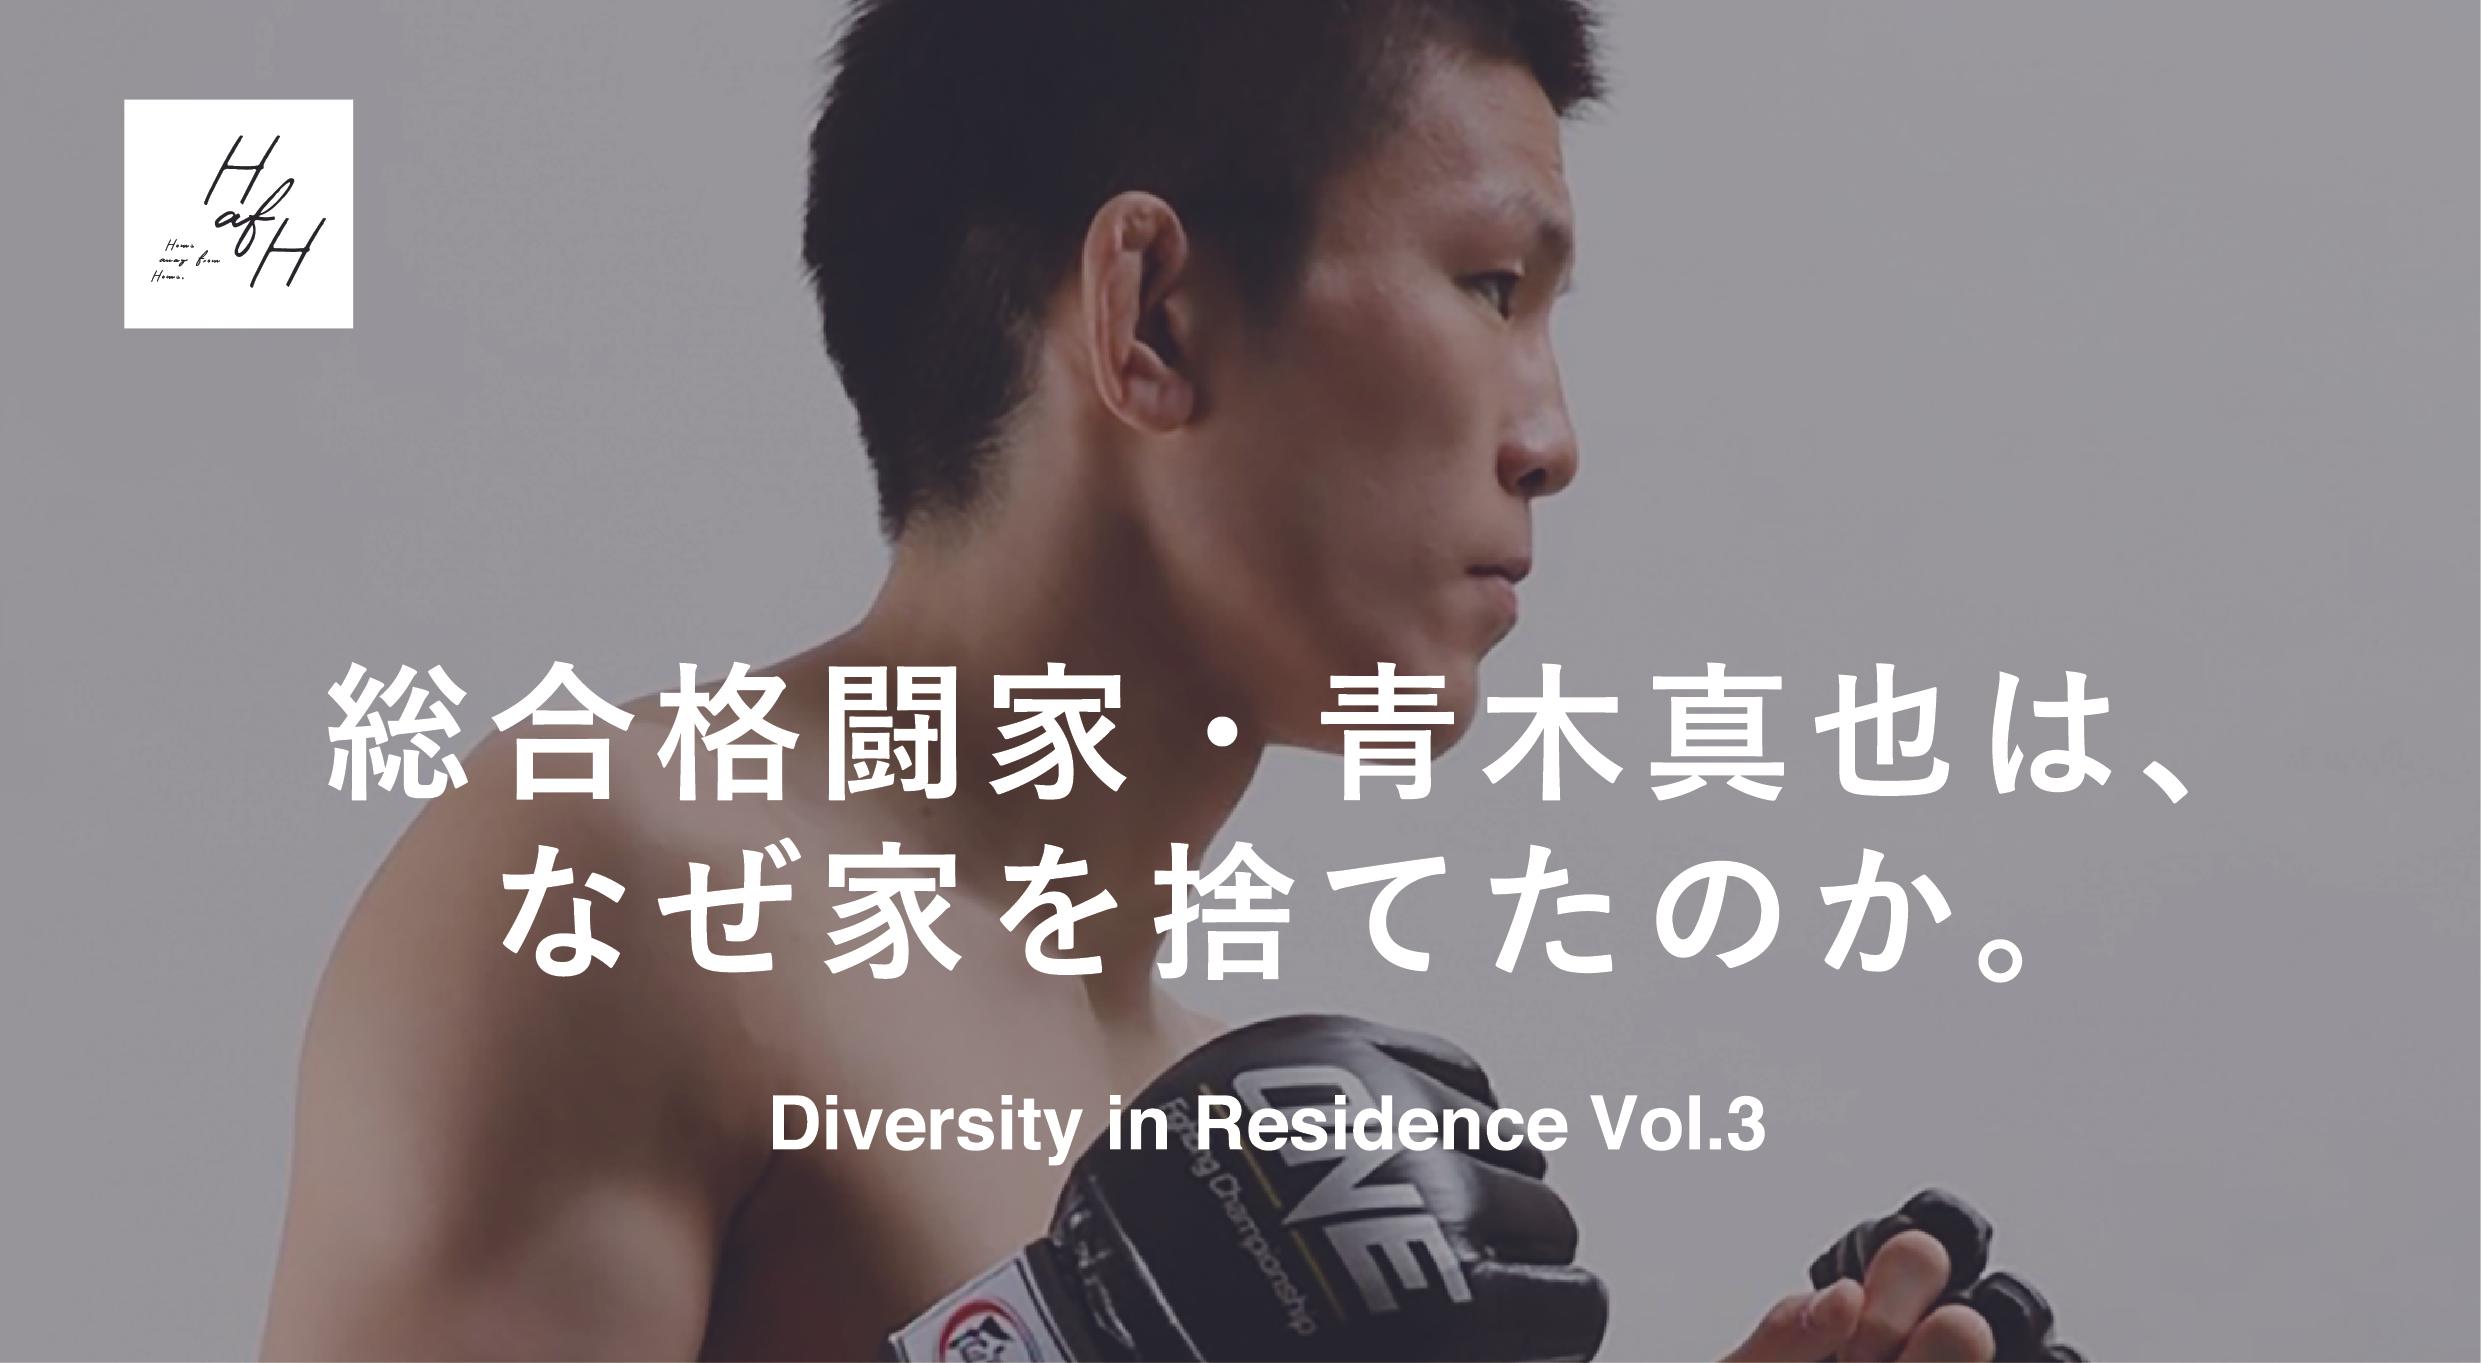 HafH Diversity in Residence Project Report Vol.3  &#8211; Why MMA Fighter Shinya Aoki gave up his house &#8211;